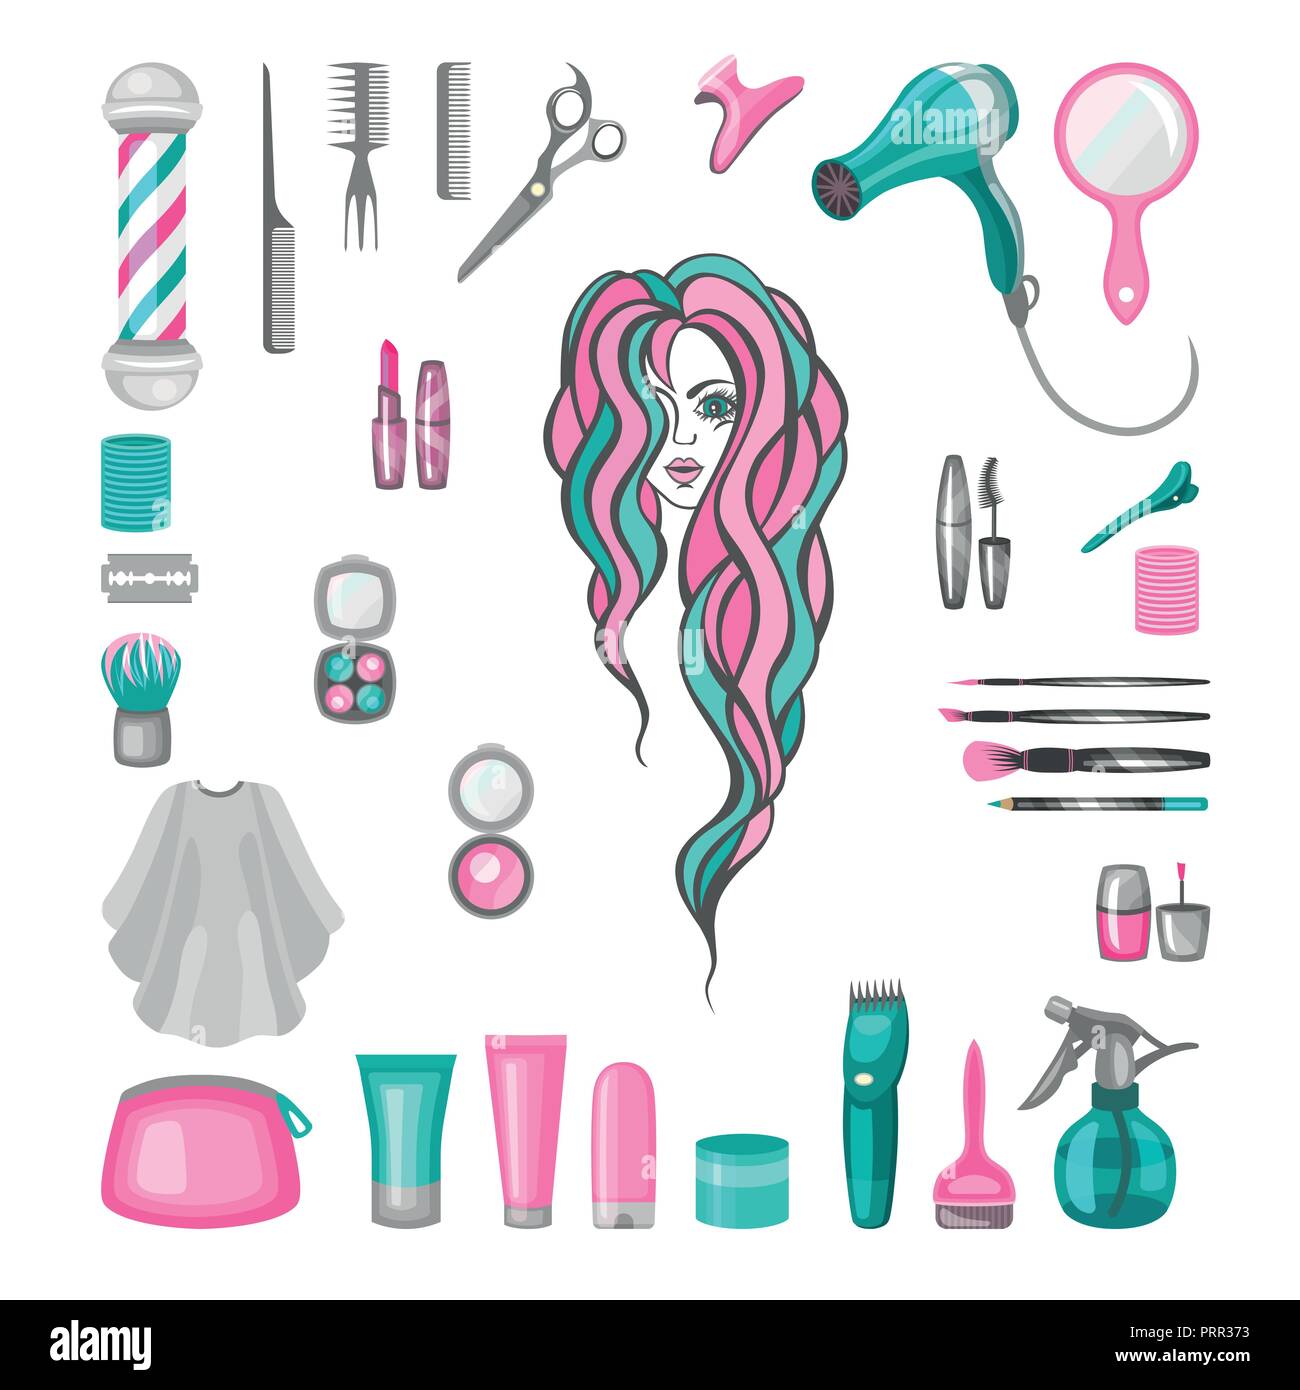 Hair cut, manicure, makeup, hair coloring, hairdressing, styling professional beauty tools and equipment big set. Stock Vector